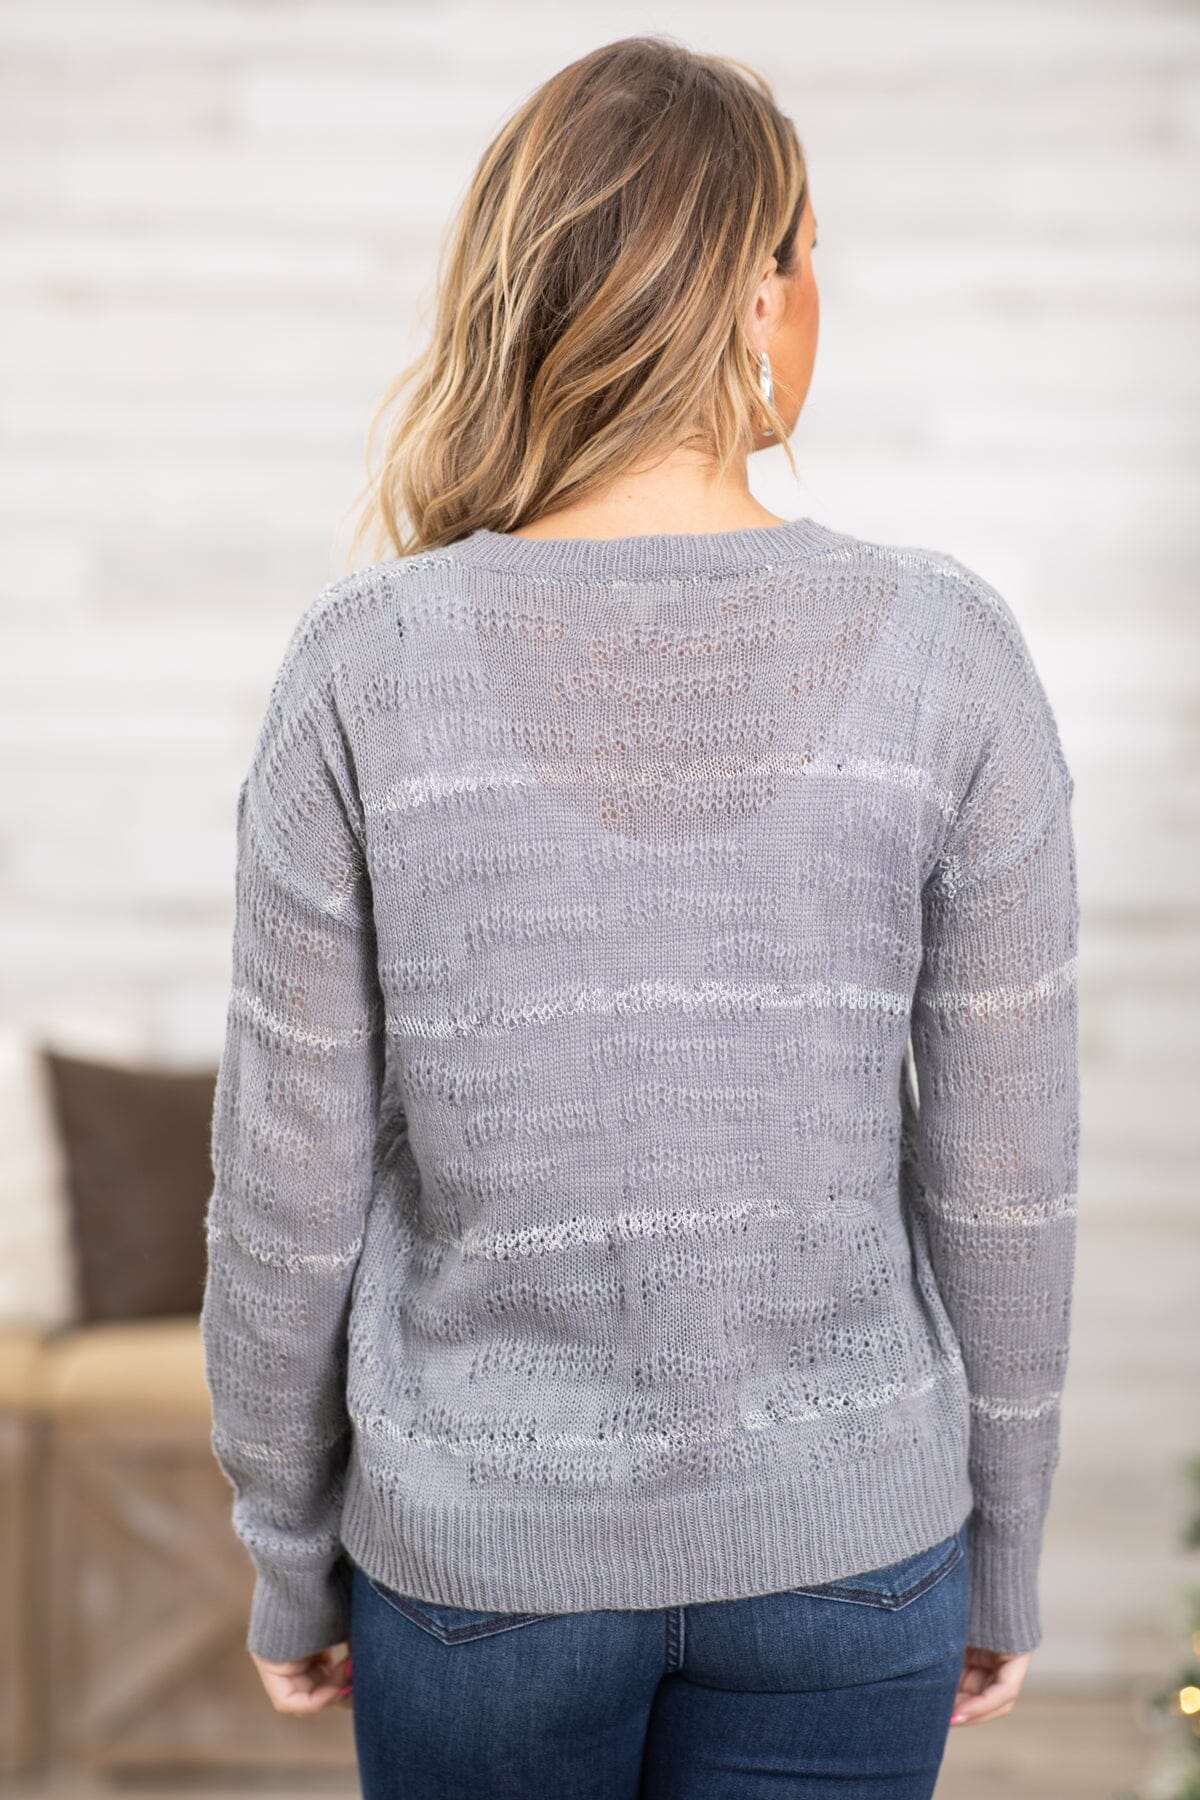 Steel Textured Stripe Sweater - Filly Flair